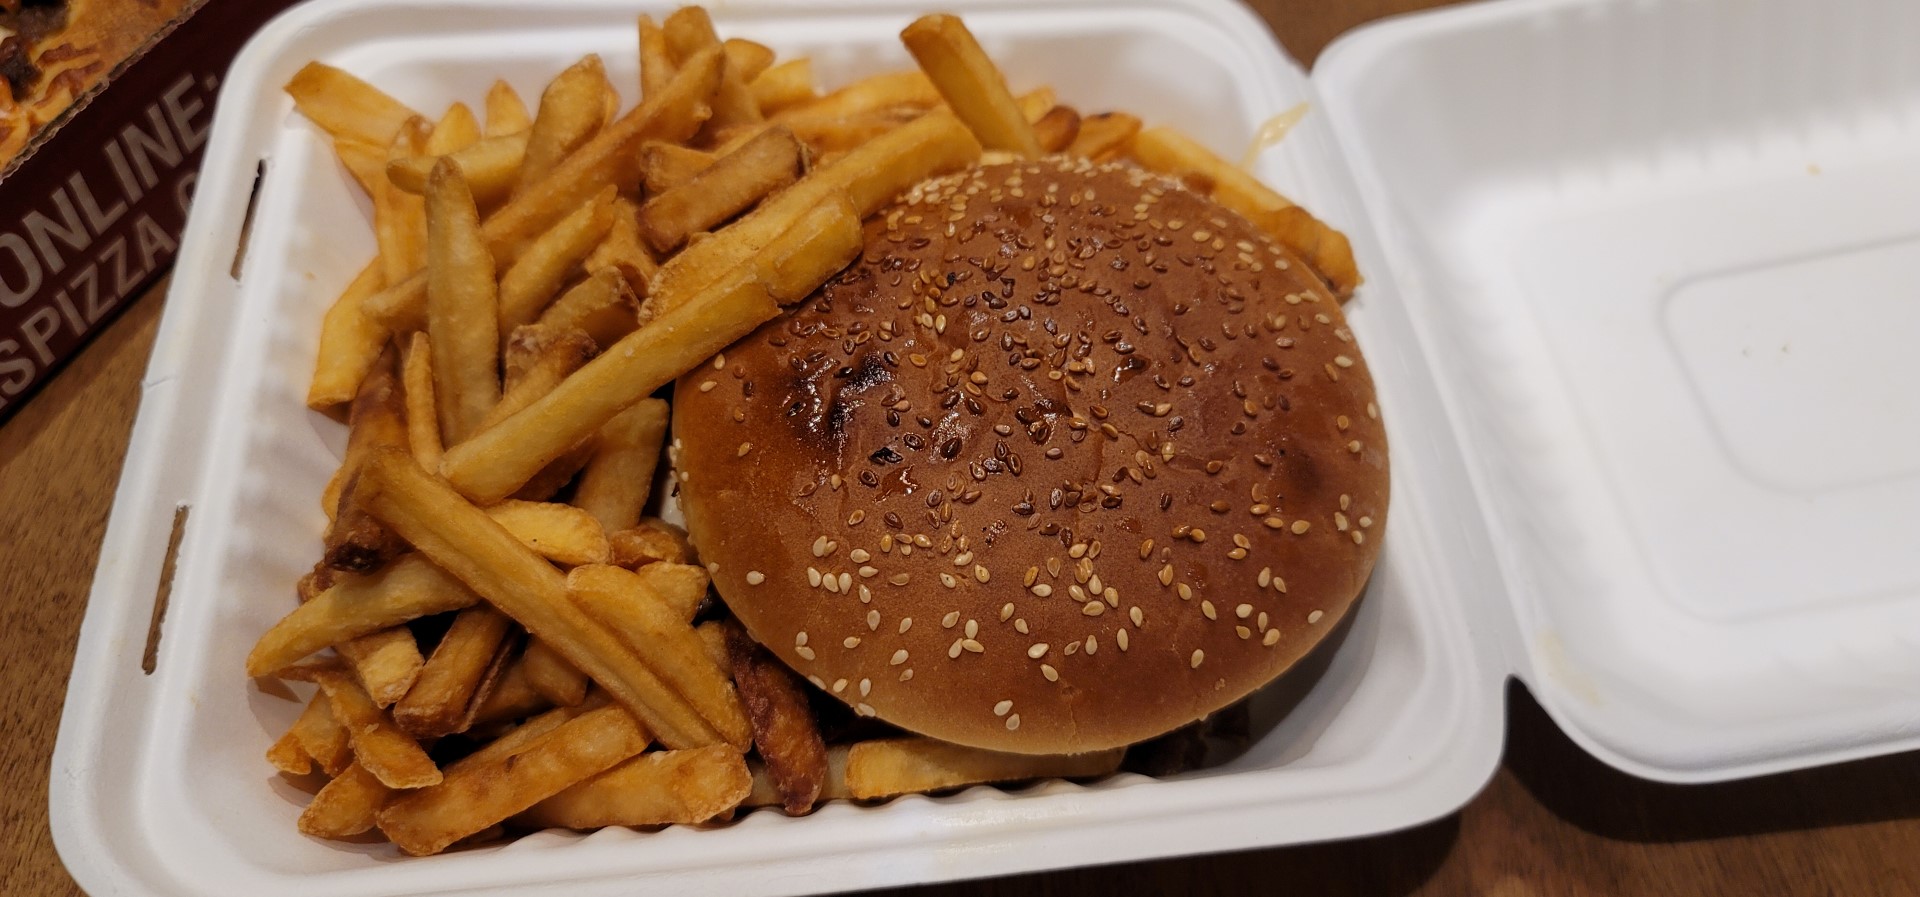 donair burger from Alexandra's in Halifax delivery